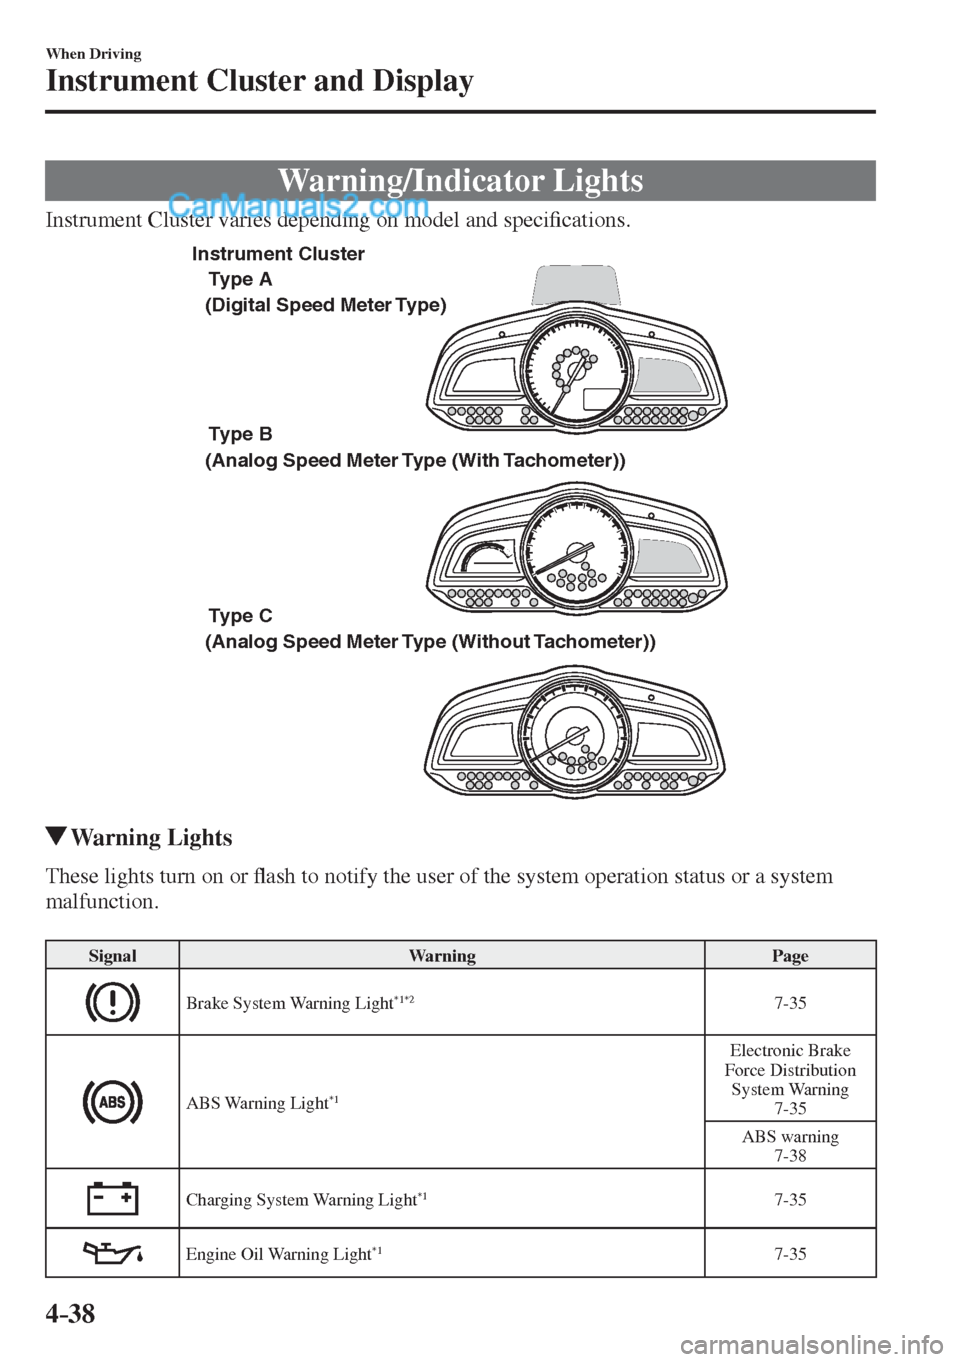 MAZDA MODEL 2 2017  Owners Manual (in English) 4–38
When Driving
Instrument Cluster and Display
 Warning/Indicator  Lights
    Instrument Cluster varies depending on model and speci�¿ cations.
 
Type A
Type B 
Type C   (Digital Speed Meter Type